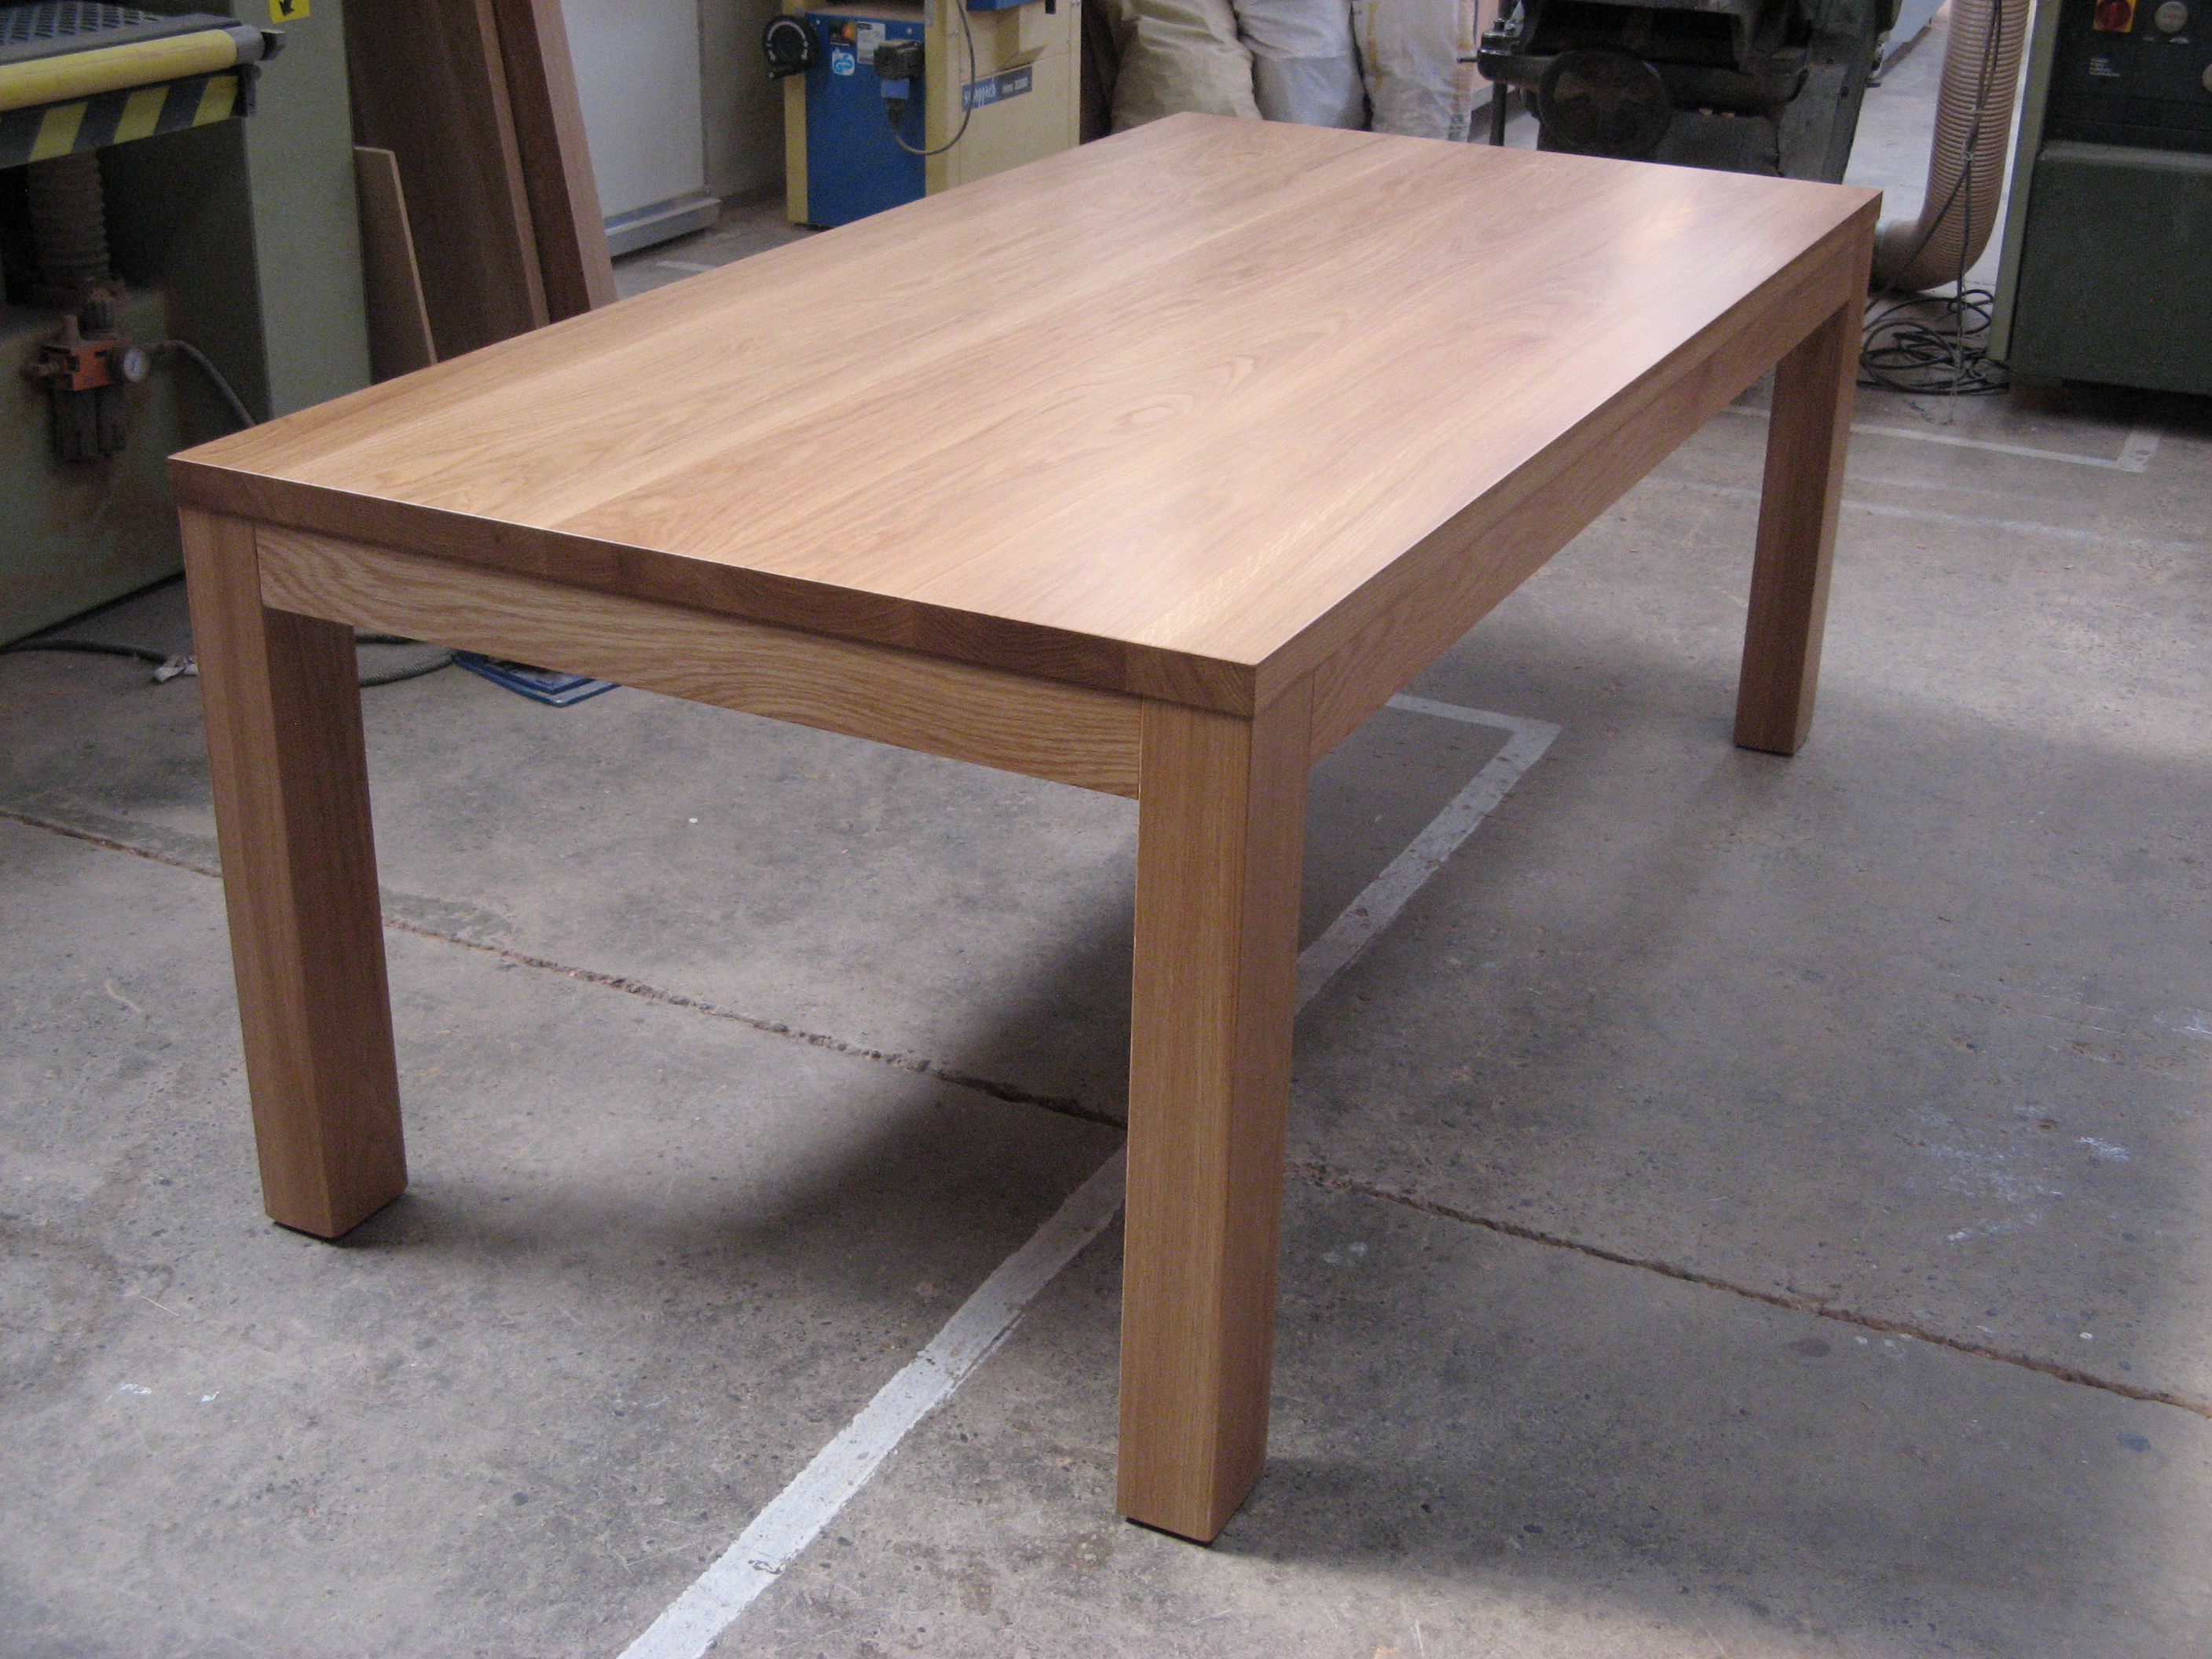 Dining Tables Gavin Cox Furniture for The Most Amazing  dining tables new zealand regarding Inviting